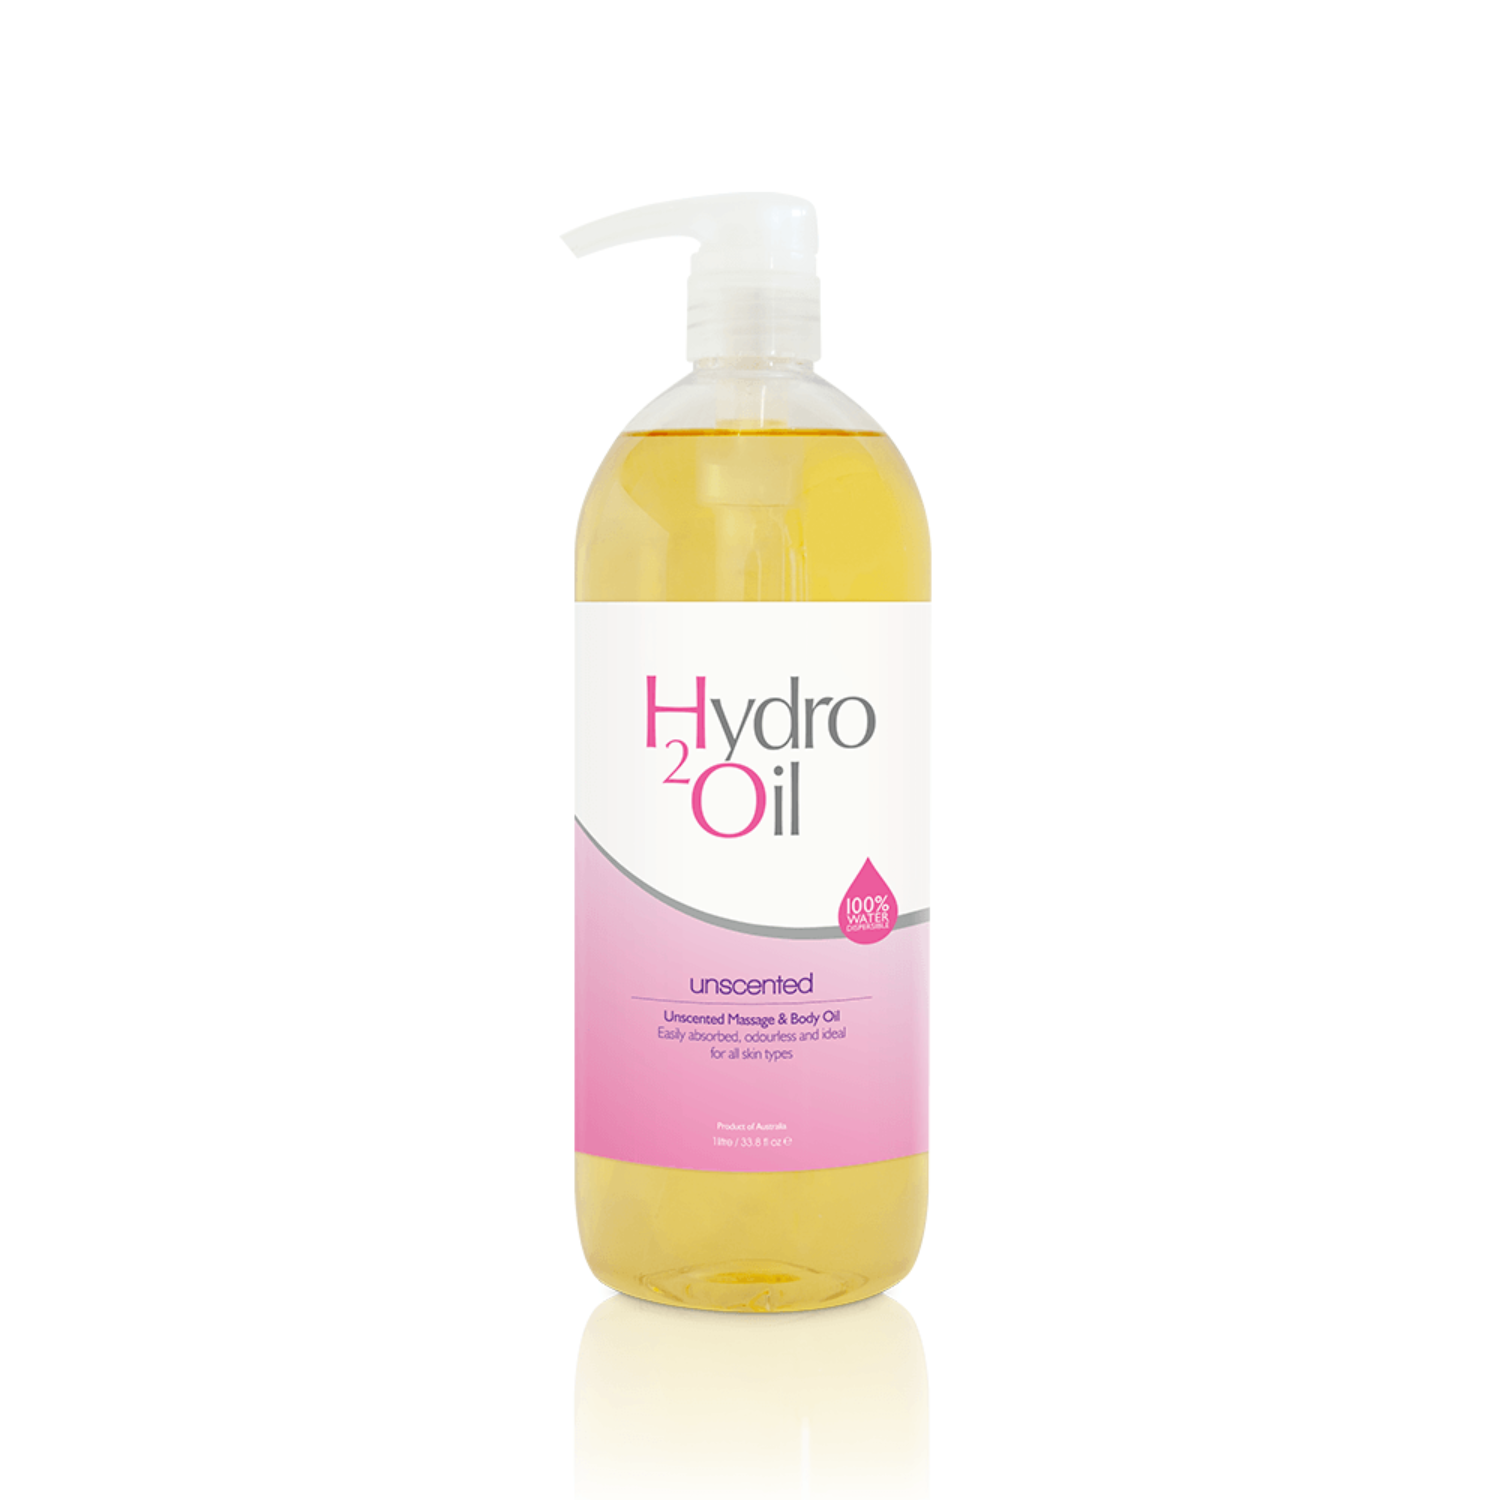 HYDRO OIL - UNSCENTED